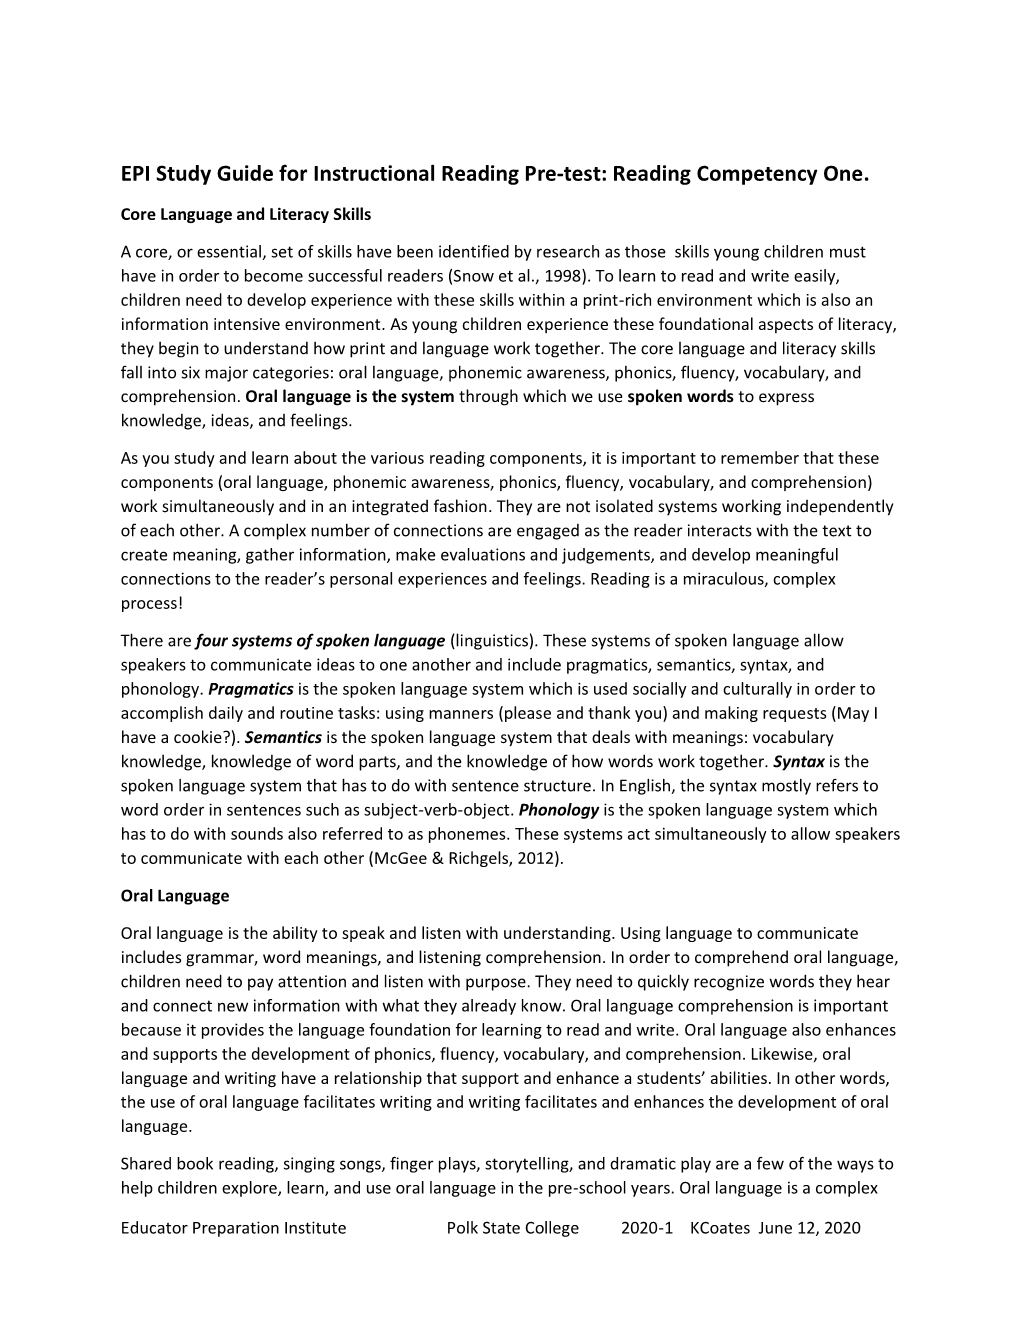 EPI Study Guide for Instructional Reading Pre-Test: Reading Competency One